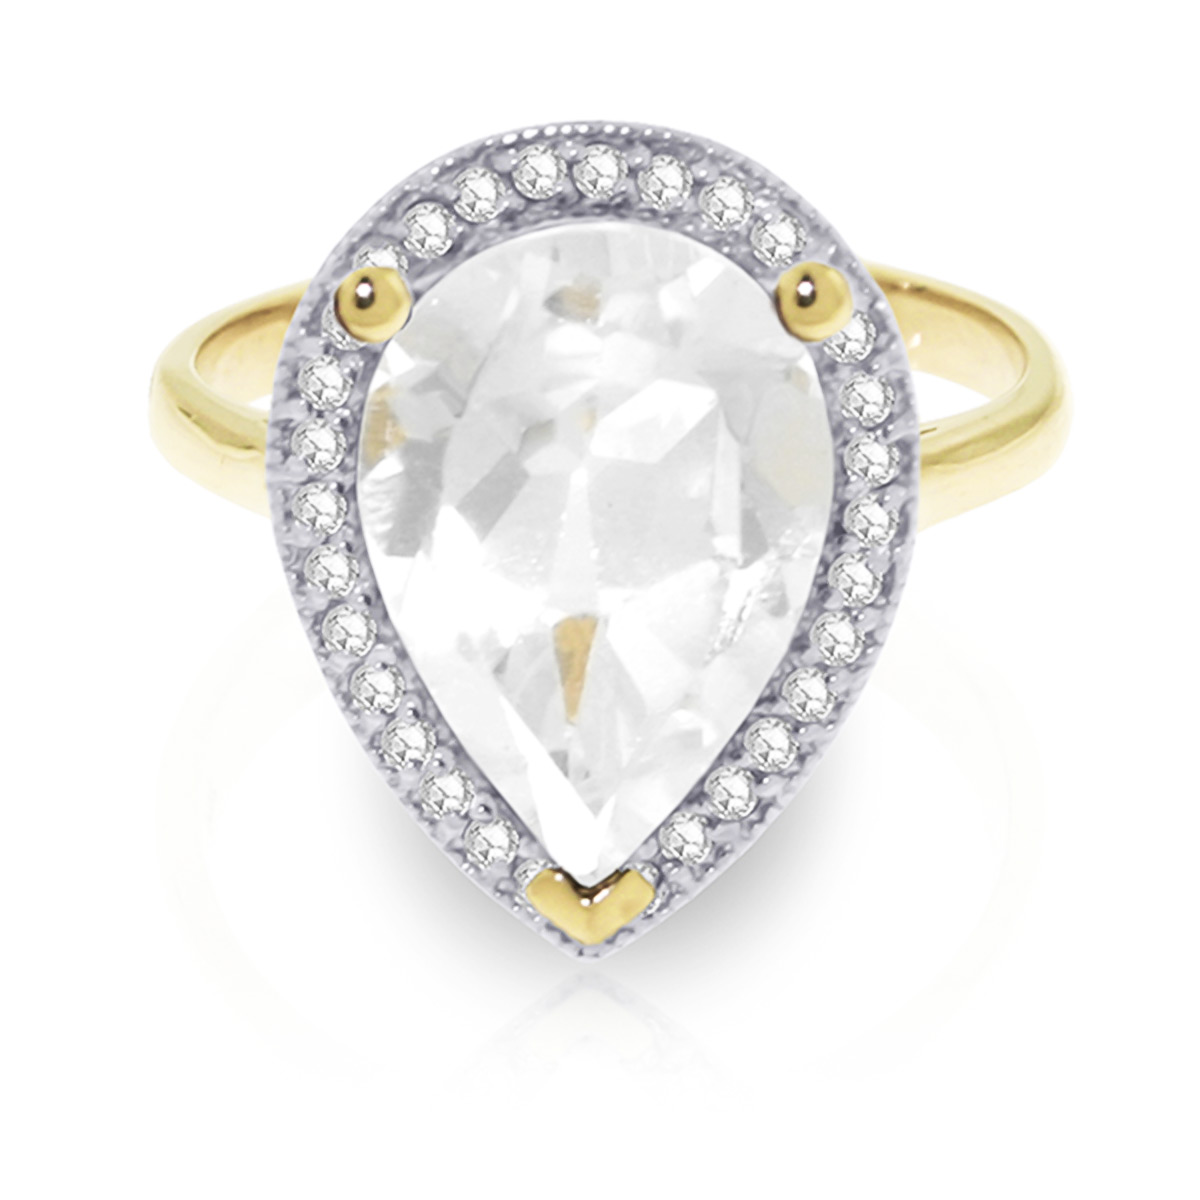 White Topaz Halo Ring 5.61 ctw in 18ct Gold